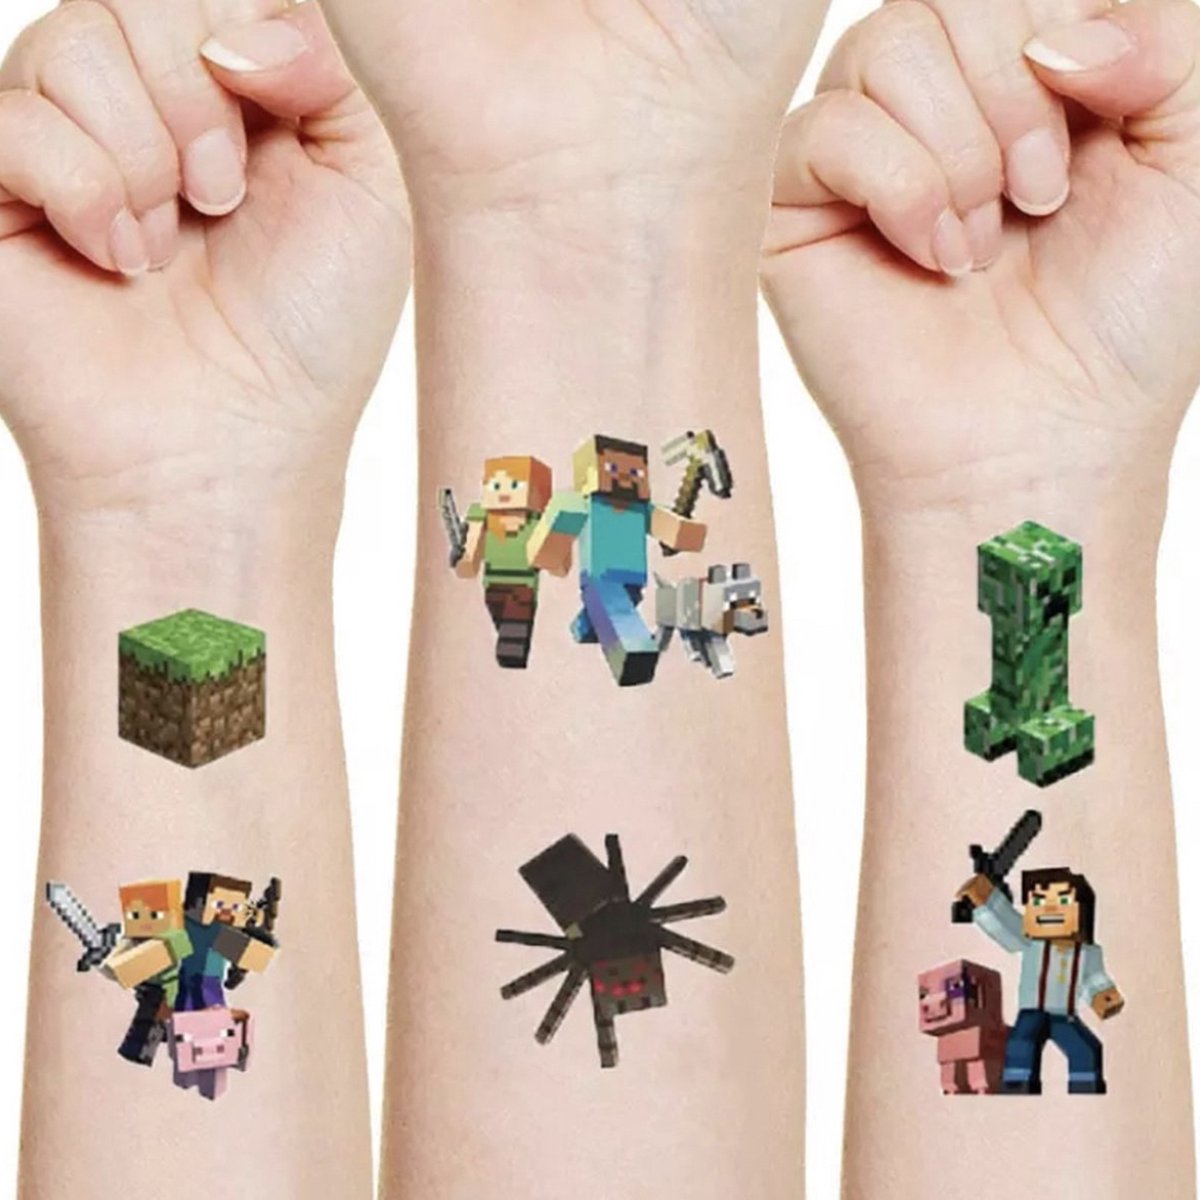 Amazon.com: Multicolor Minecraft Tattoos (24 Count) - Perfect for Kids'  Parties, Themed Events, and Gaming Celebrations : Beauty & Personal Care